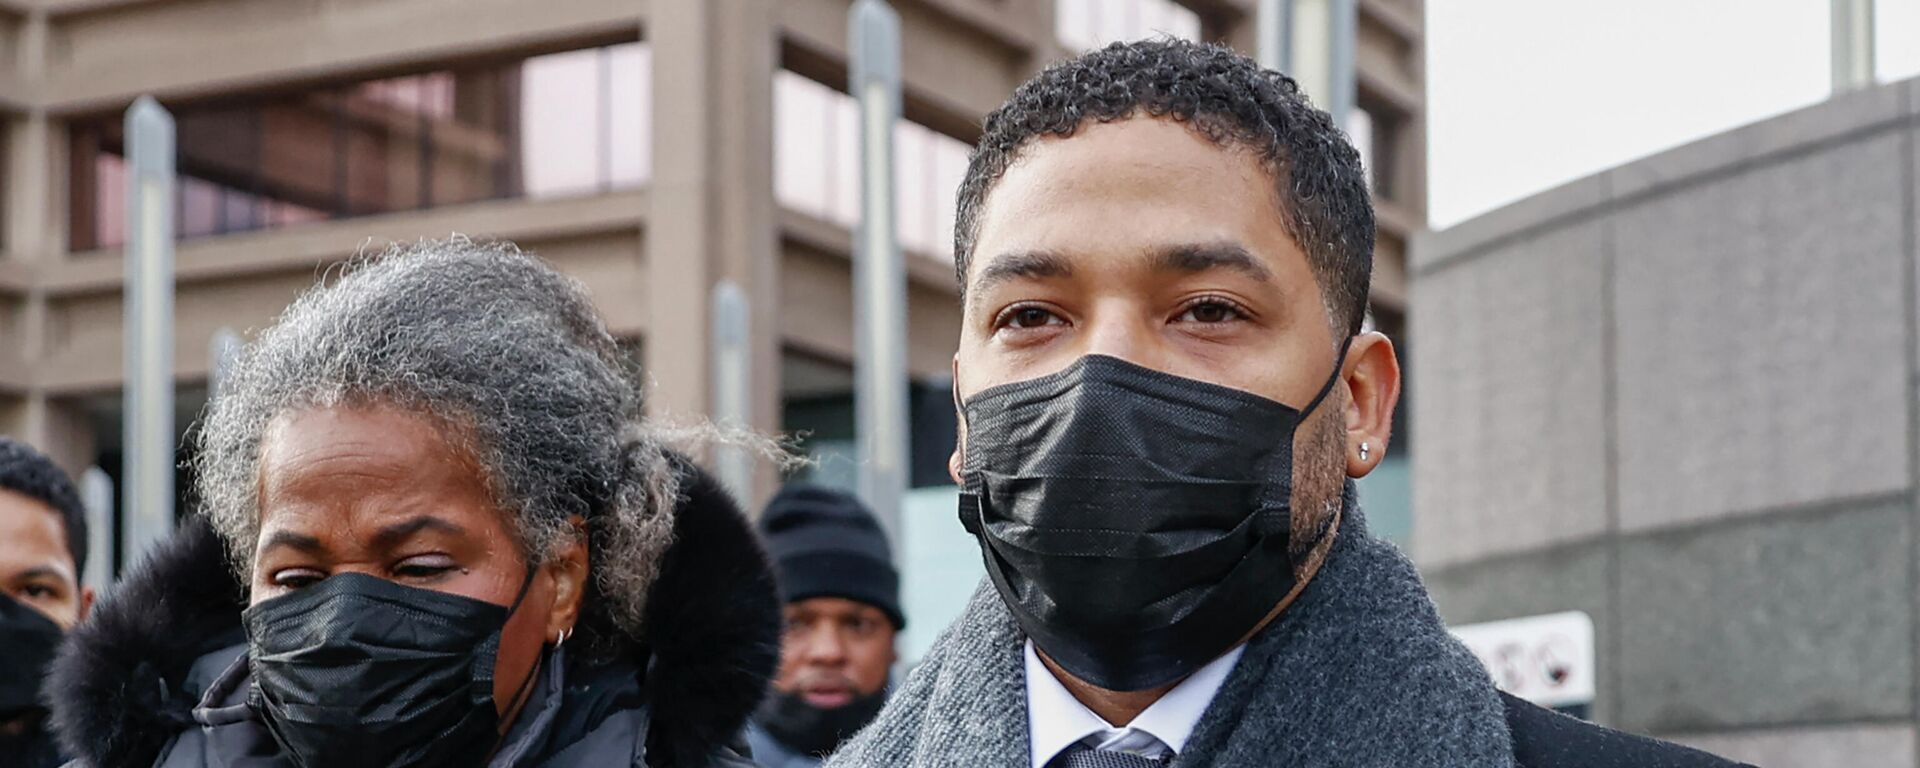 Jussie Smollett leaves the Leighton Criminal Court Building after his trial on disorderly conduct charges on December 7 2021 in Chicago, Illinois. - Sputnik International, 1920, 08.12.2021